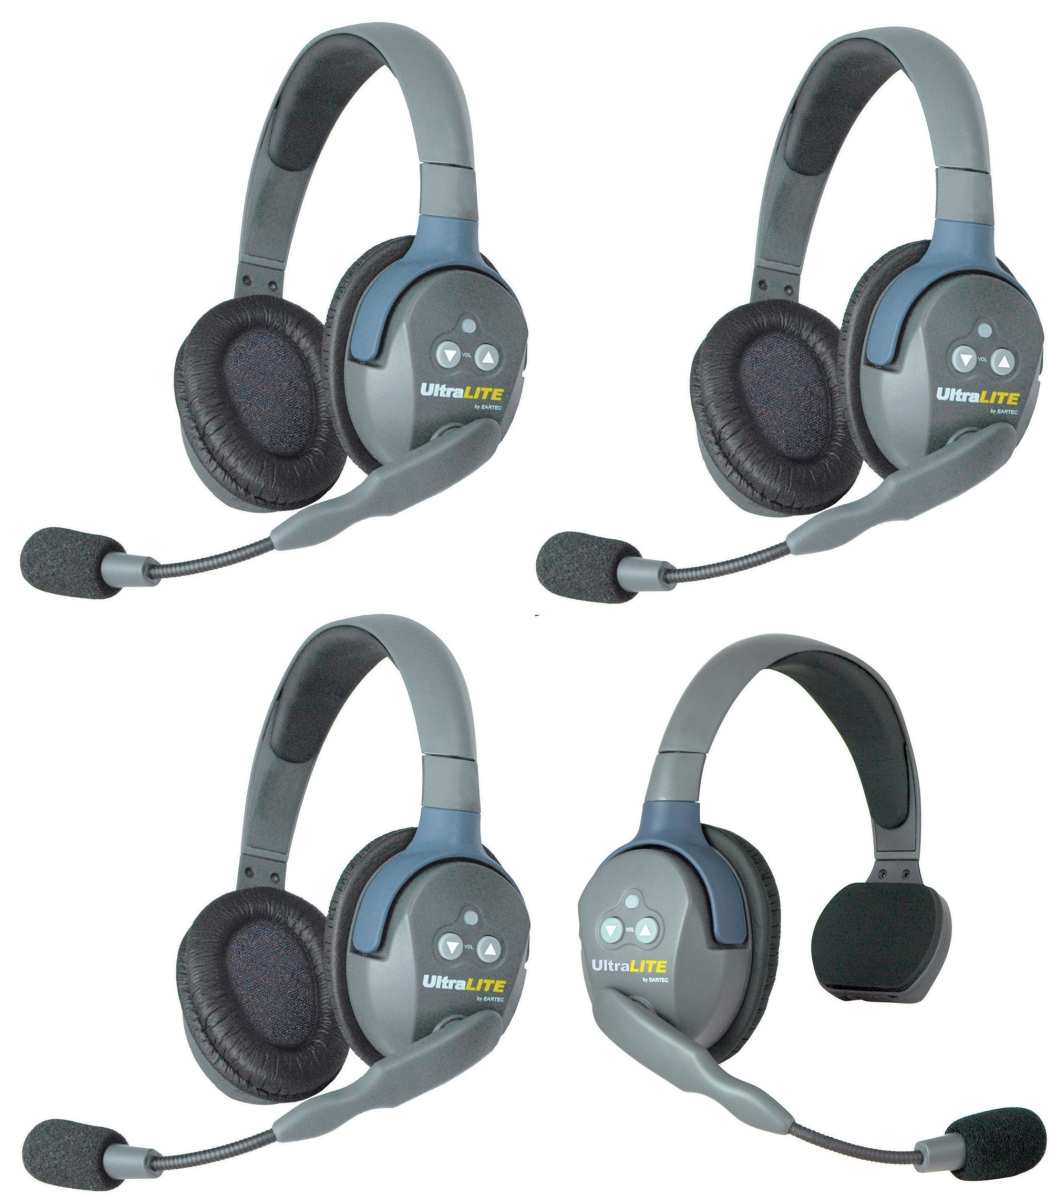 Picture of Eartec EAR-UL413 UltraLITE 4 Person Intercom System with 1 Single 3 Double Headsets & Li-Ion Batteries